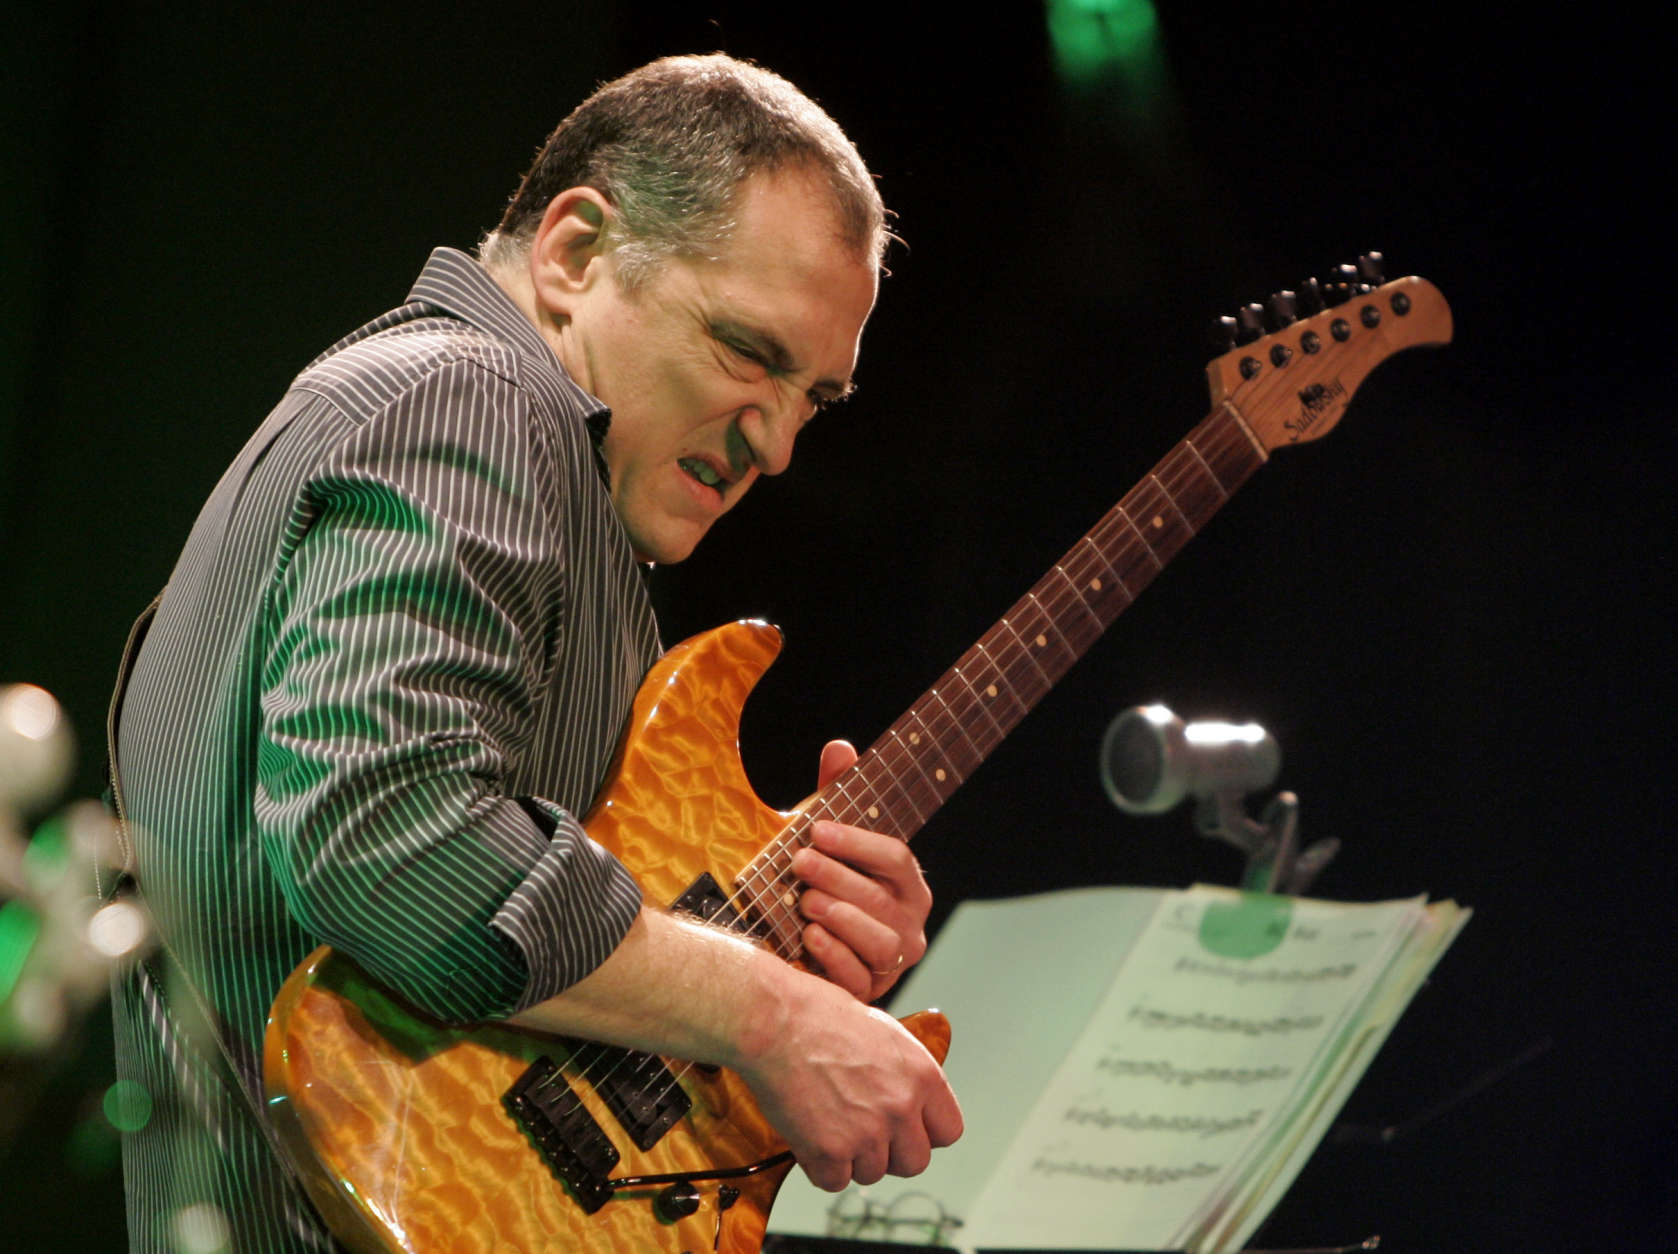 Guitarist Chuck Loeb of the All Stars Band of U.S., performs during a jazz concert in Kiev, Ukraine, late Saturday, Jan. 26, 2008. (AP Photo/Efrem Lukatsky)